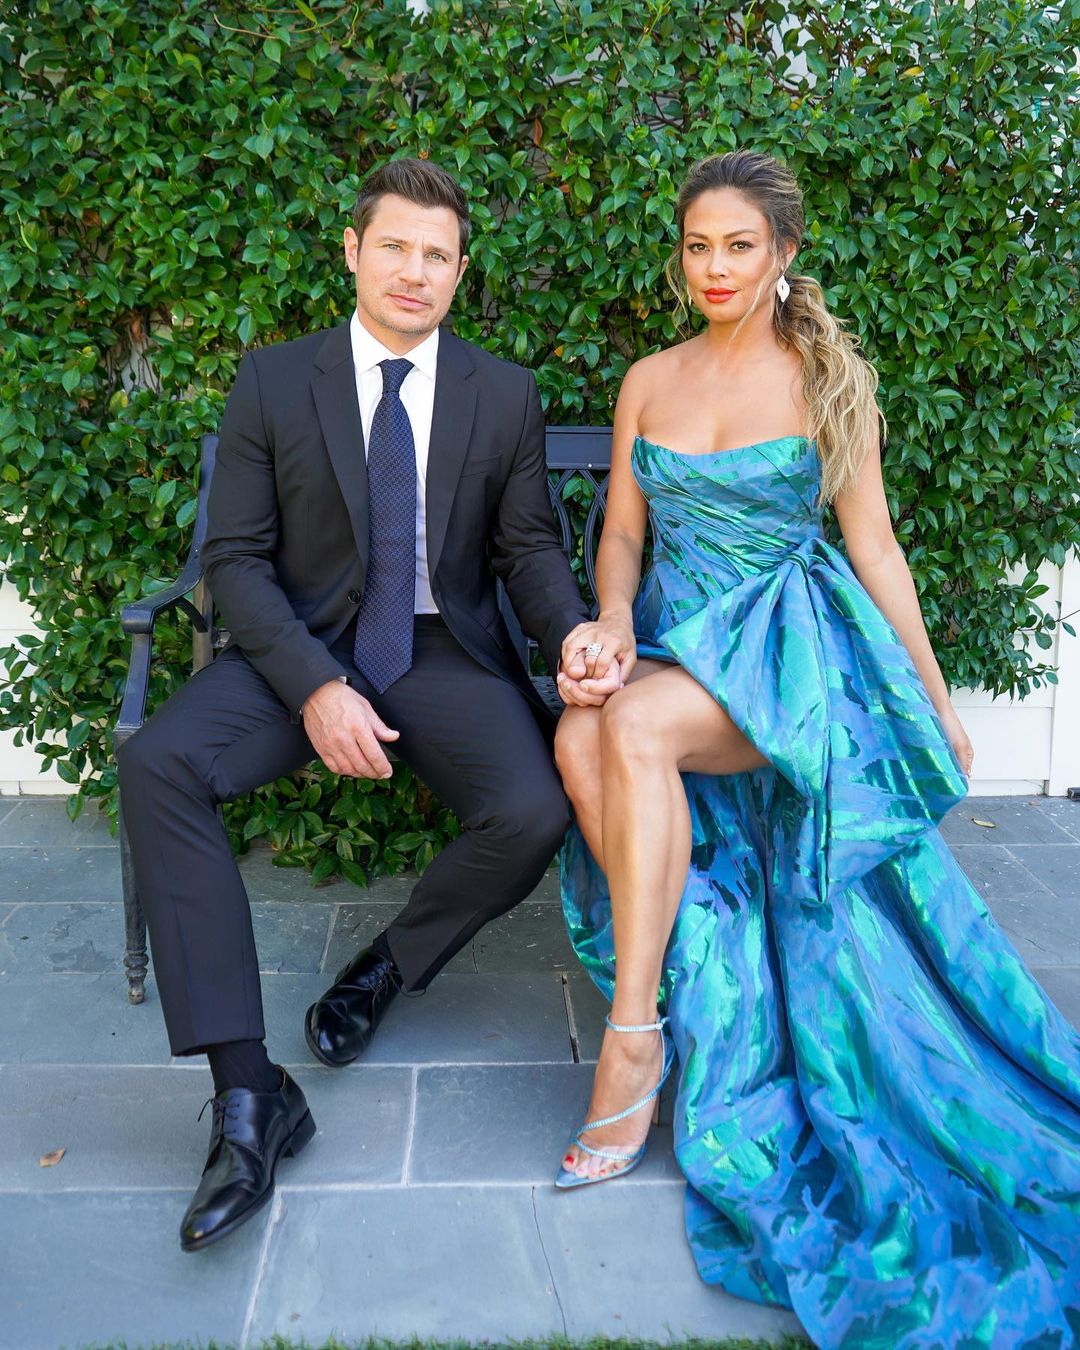 Vanessa Lachey and her husband Nick Lachey dressed up for the 2021 Emmys